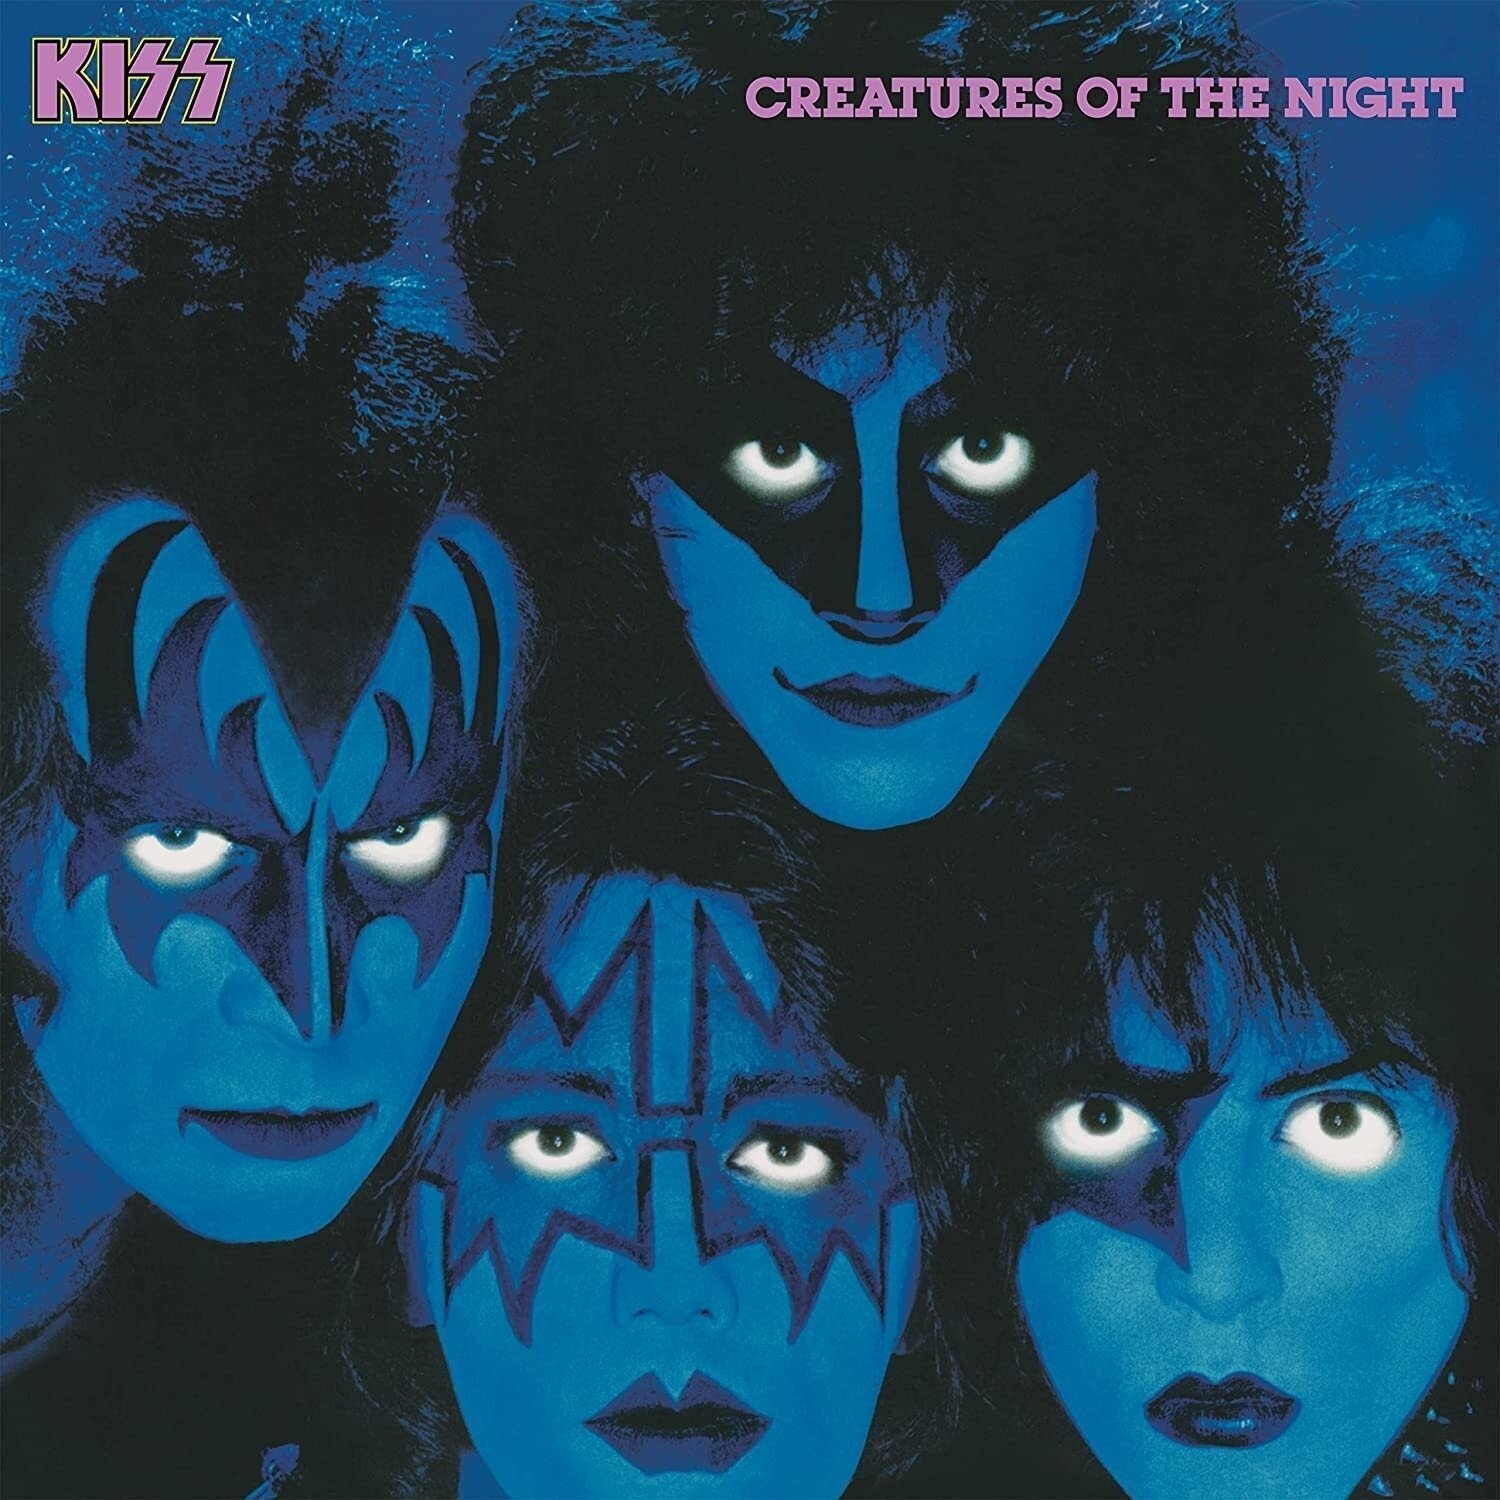 Glasbene CD Kiss - Creatures Of The Night (Remastered) (Reissue) (CD)